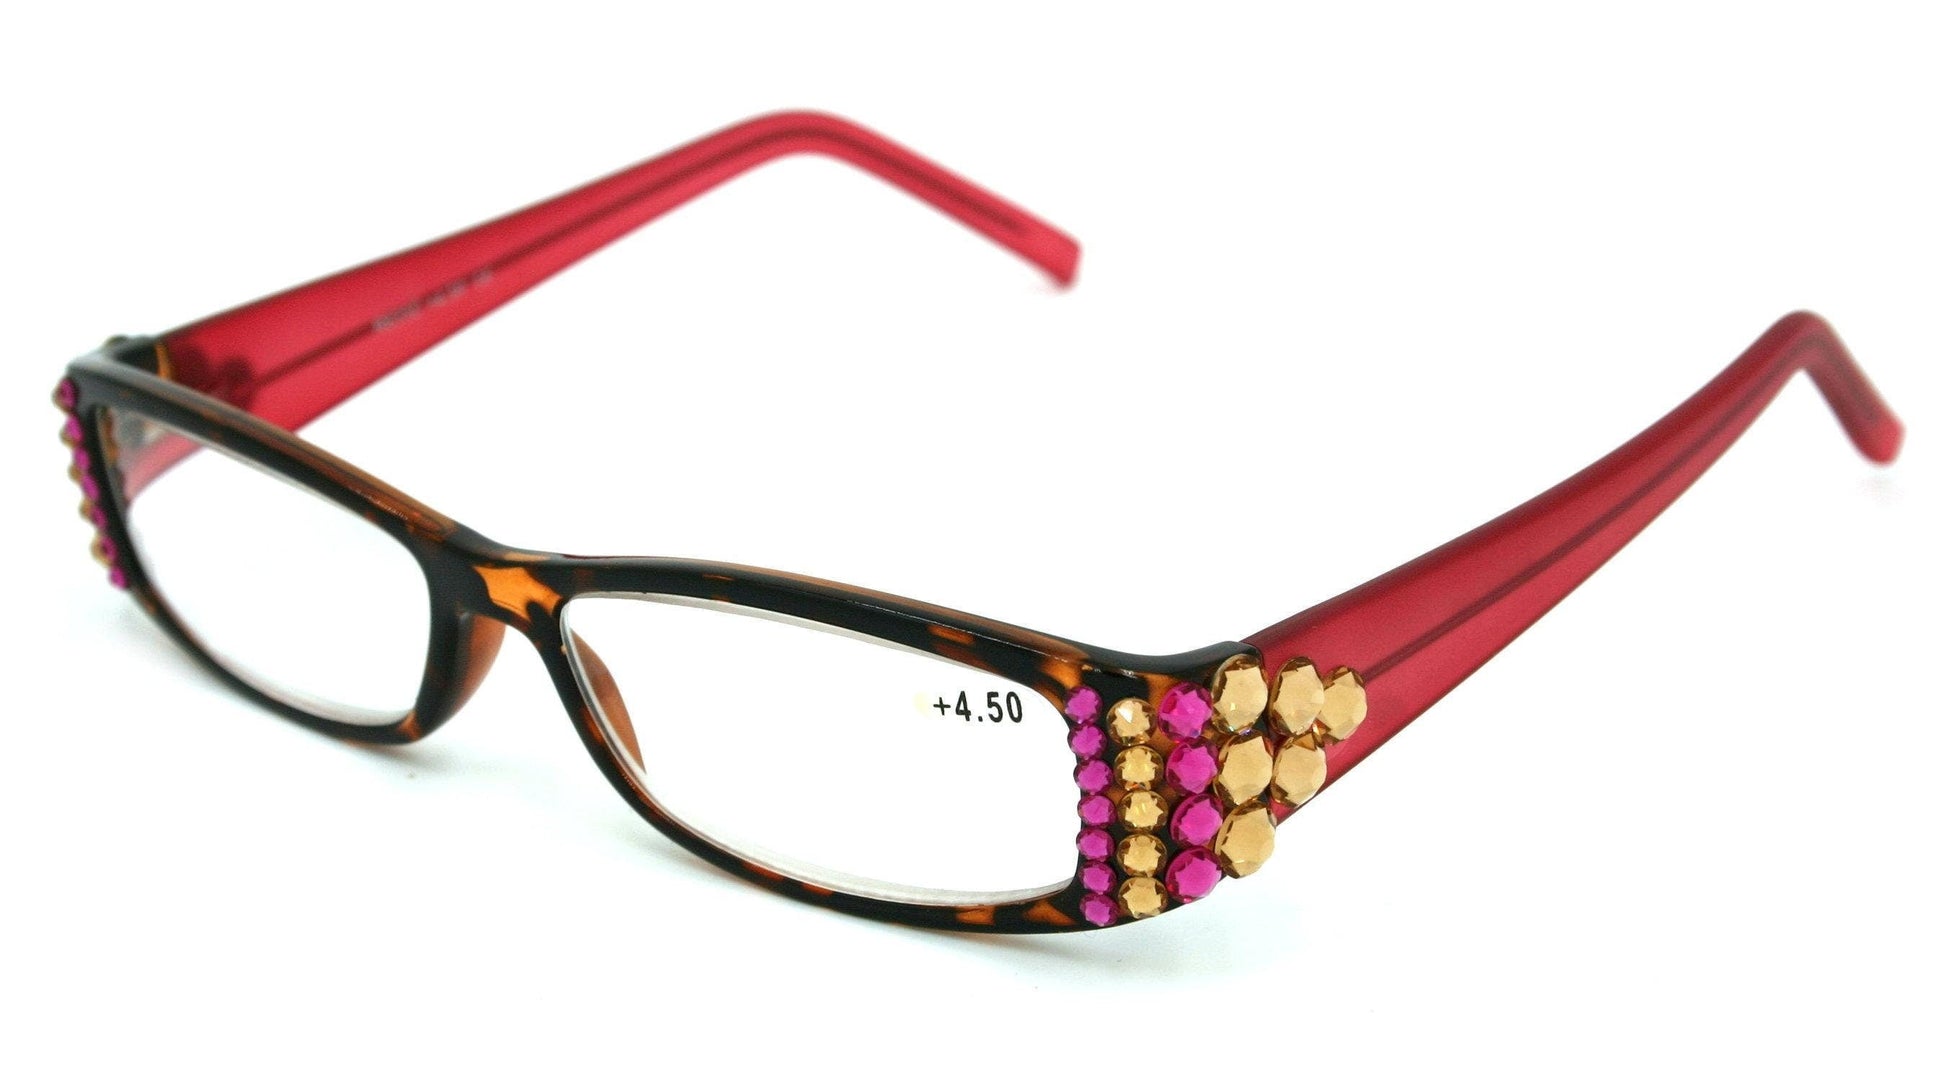 All Favorite, (Bling) Reading Glasses For Women W (L. Colorado, Rose)  (Tortoise Brown, Pink) +4 +4.5 +5 +6 NY Fifth Avenue